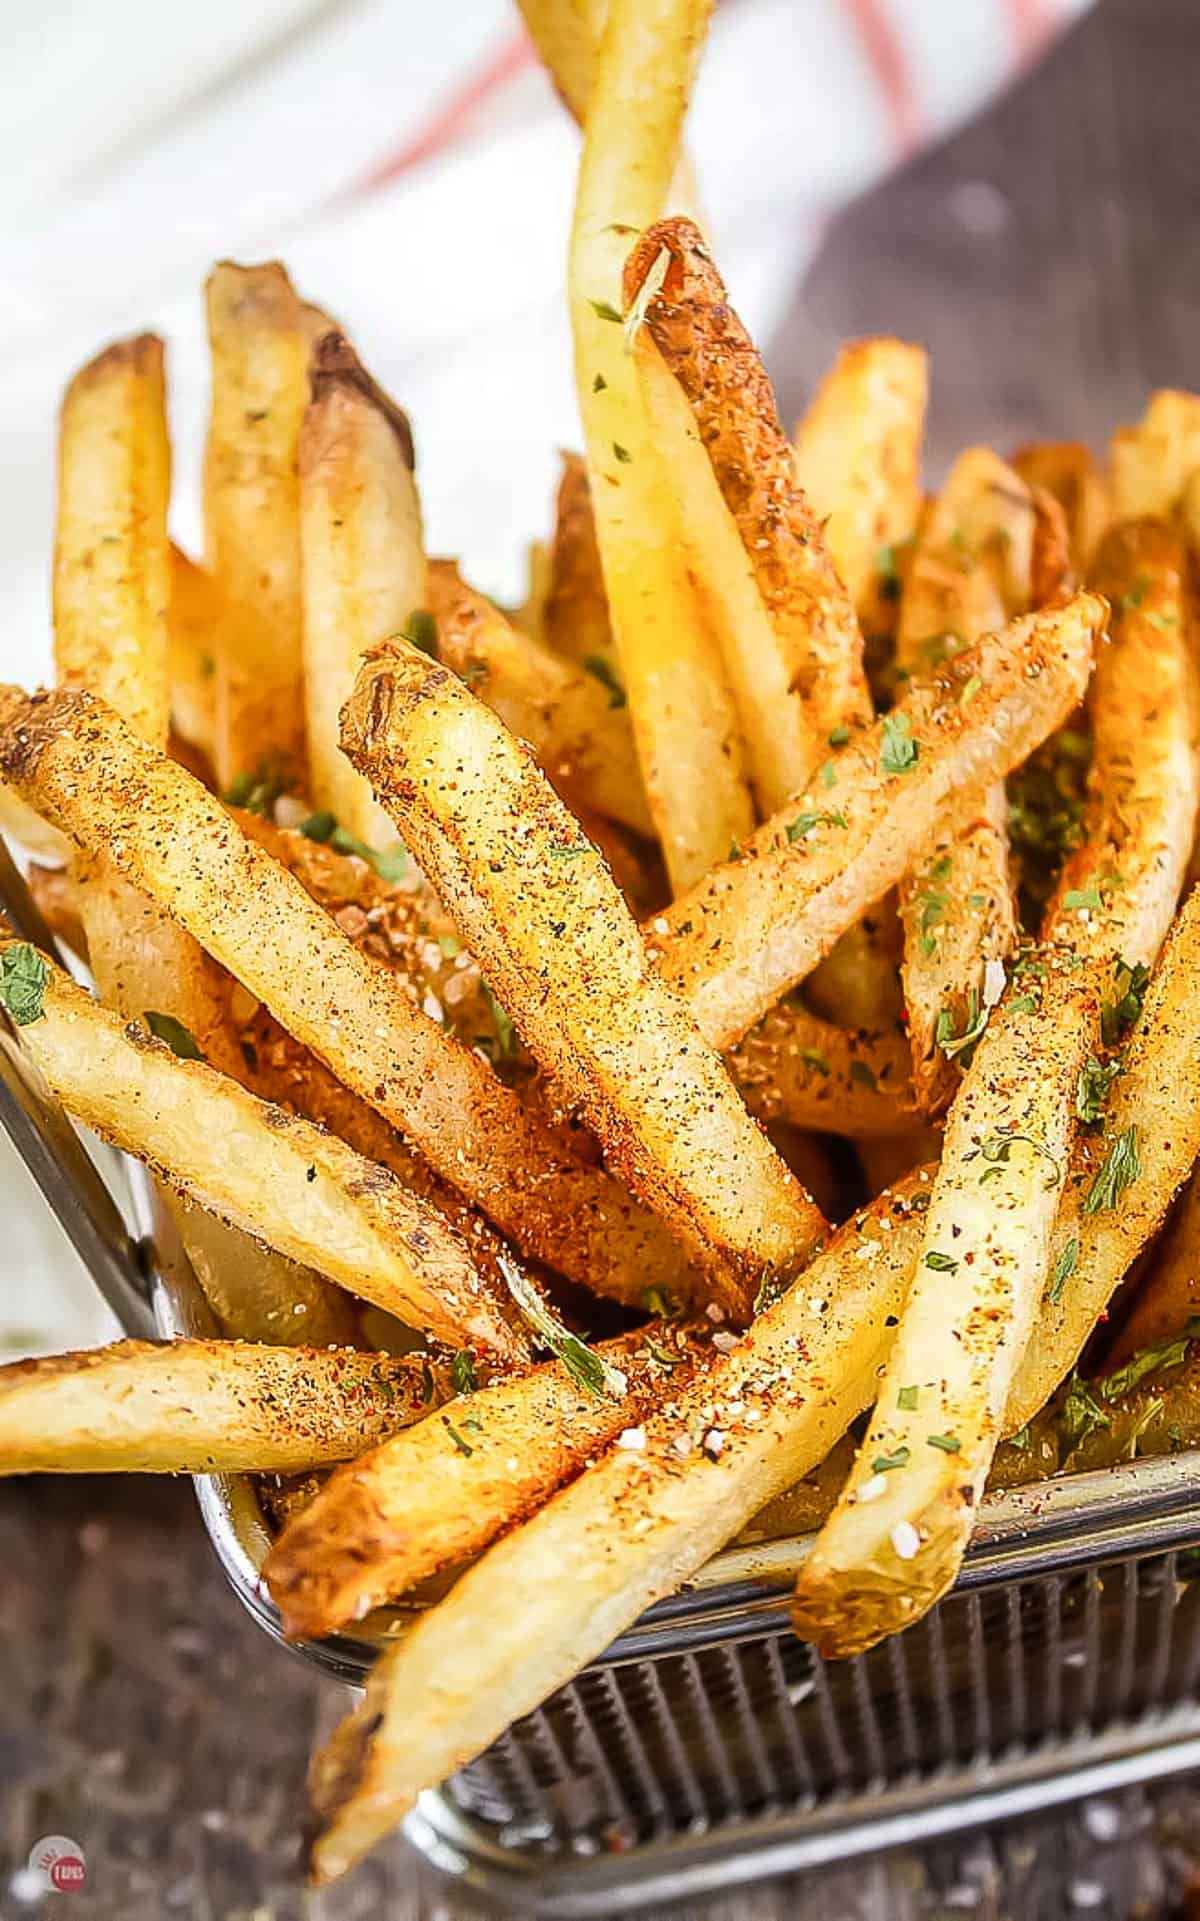 Homemade French Fries  Step-by-Step Guide to Perfect French Fries